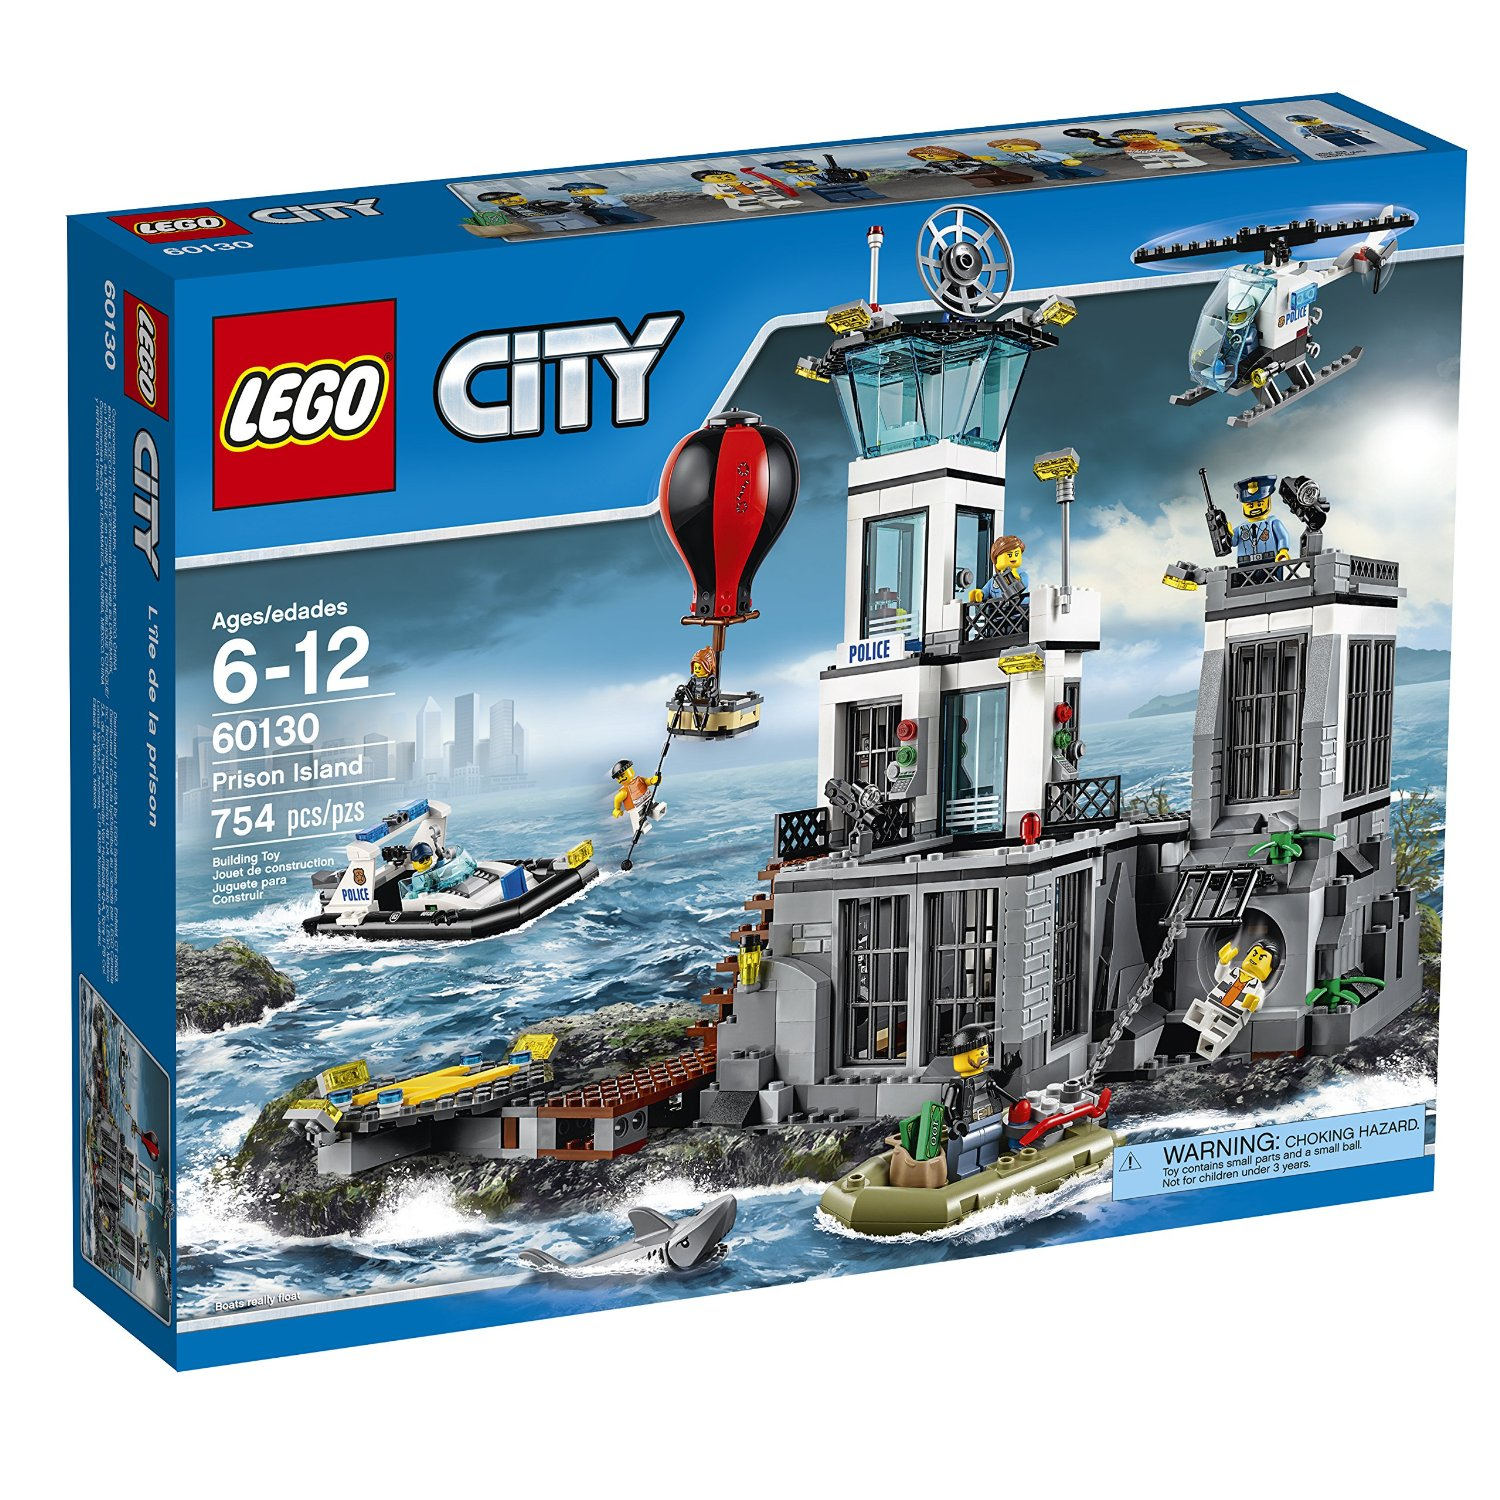 Save 36% Off the LEGO City Prison Island! Only $57.59 Shipped!